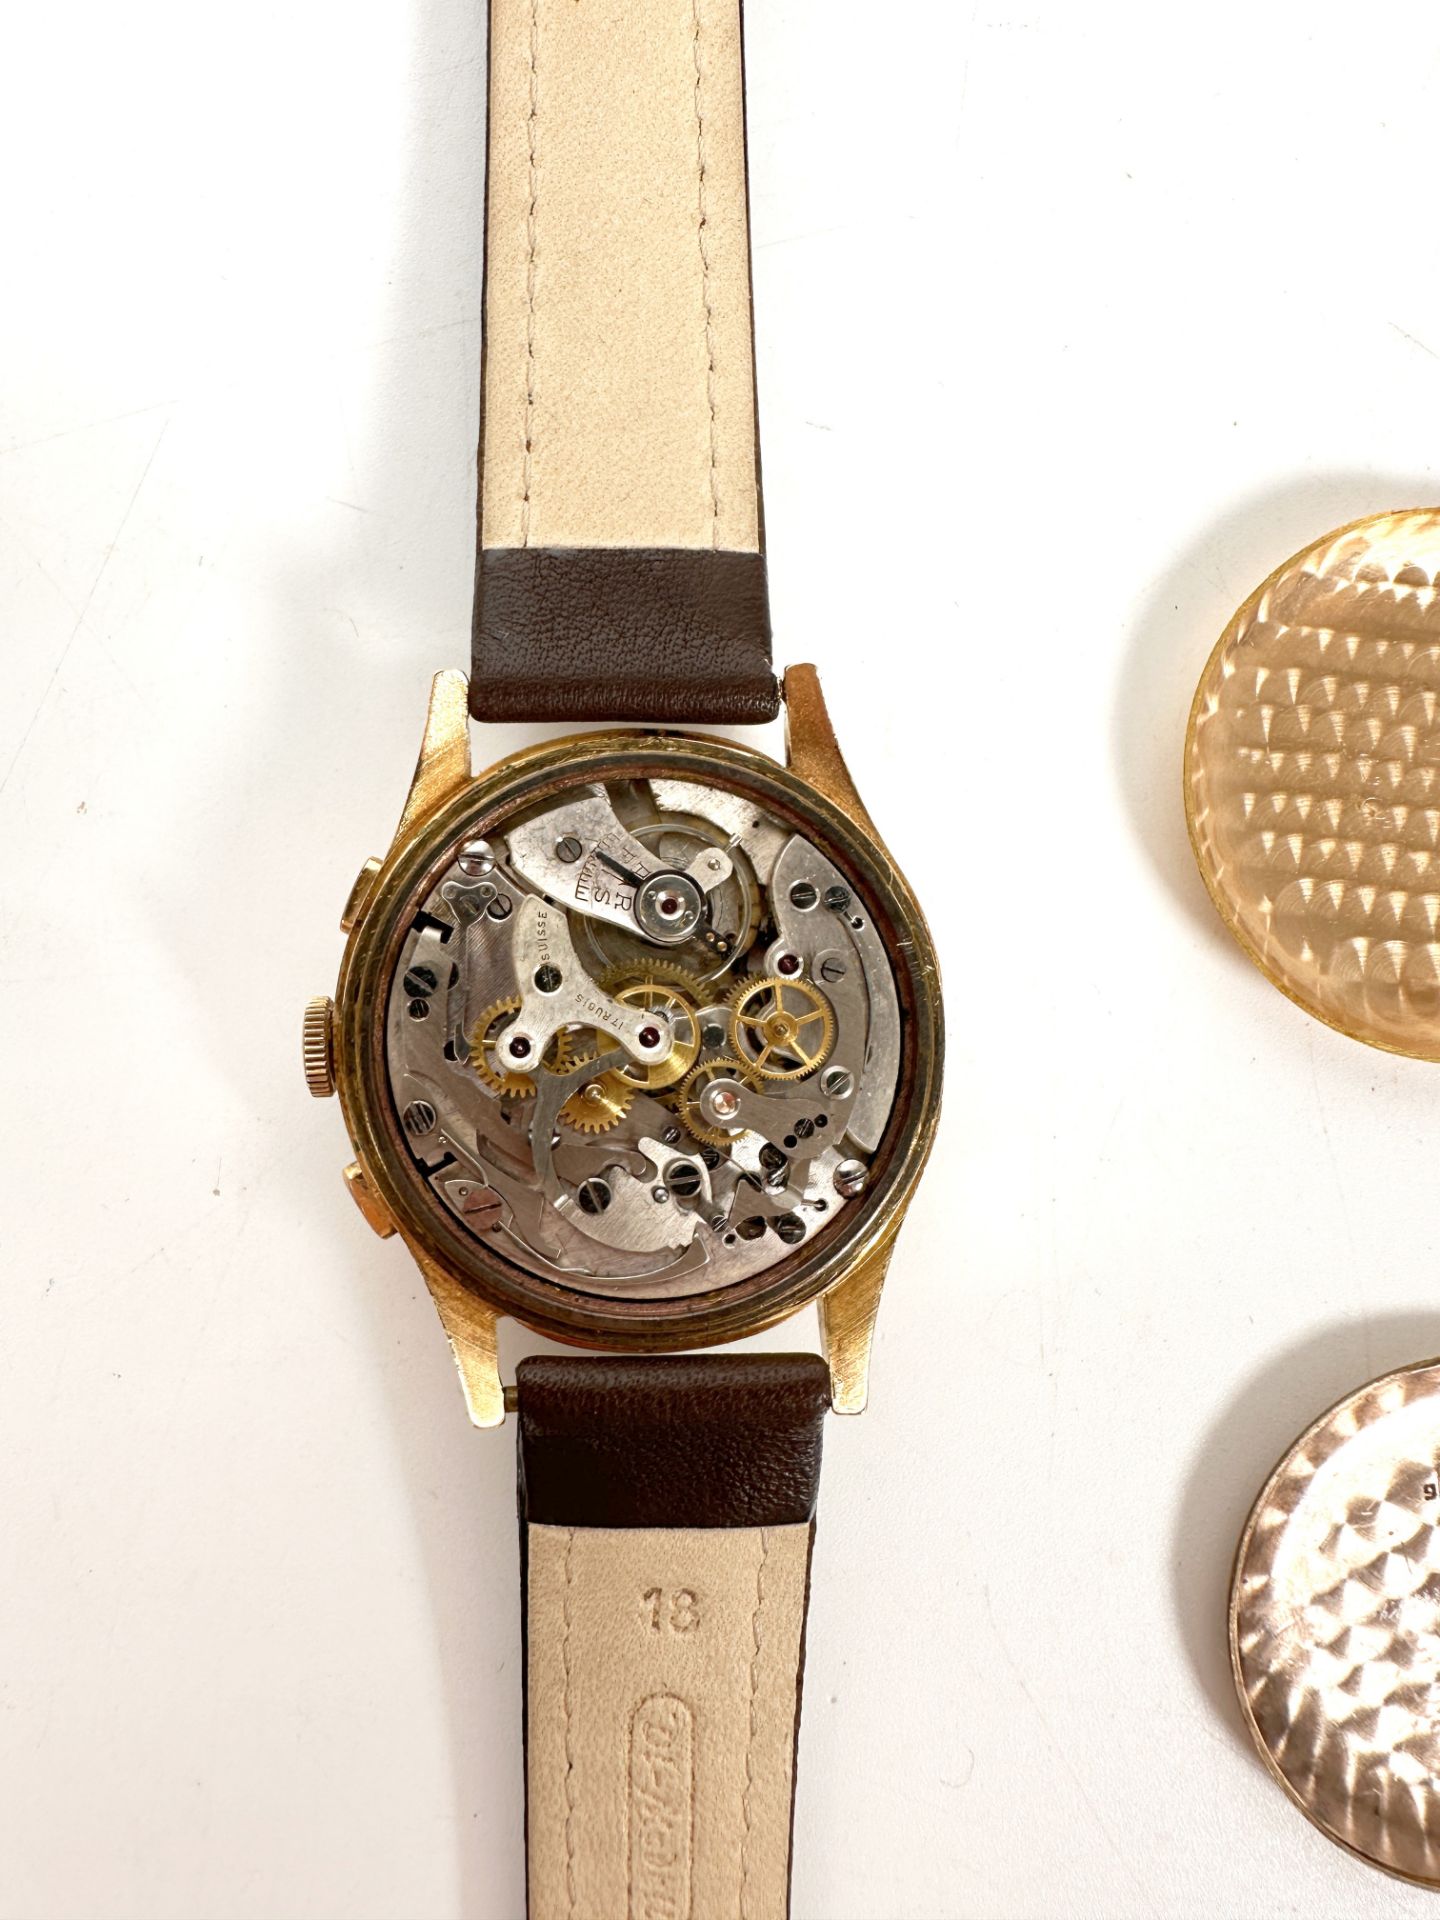 No Reserve - Orator Chronograph Suisse - Men's watch. - Image 7 of 7